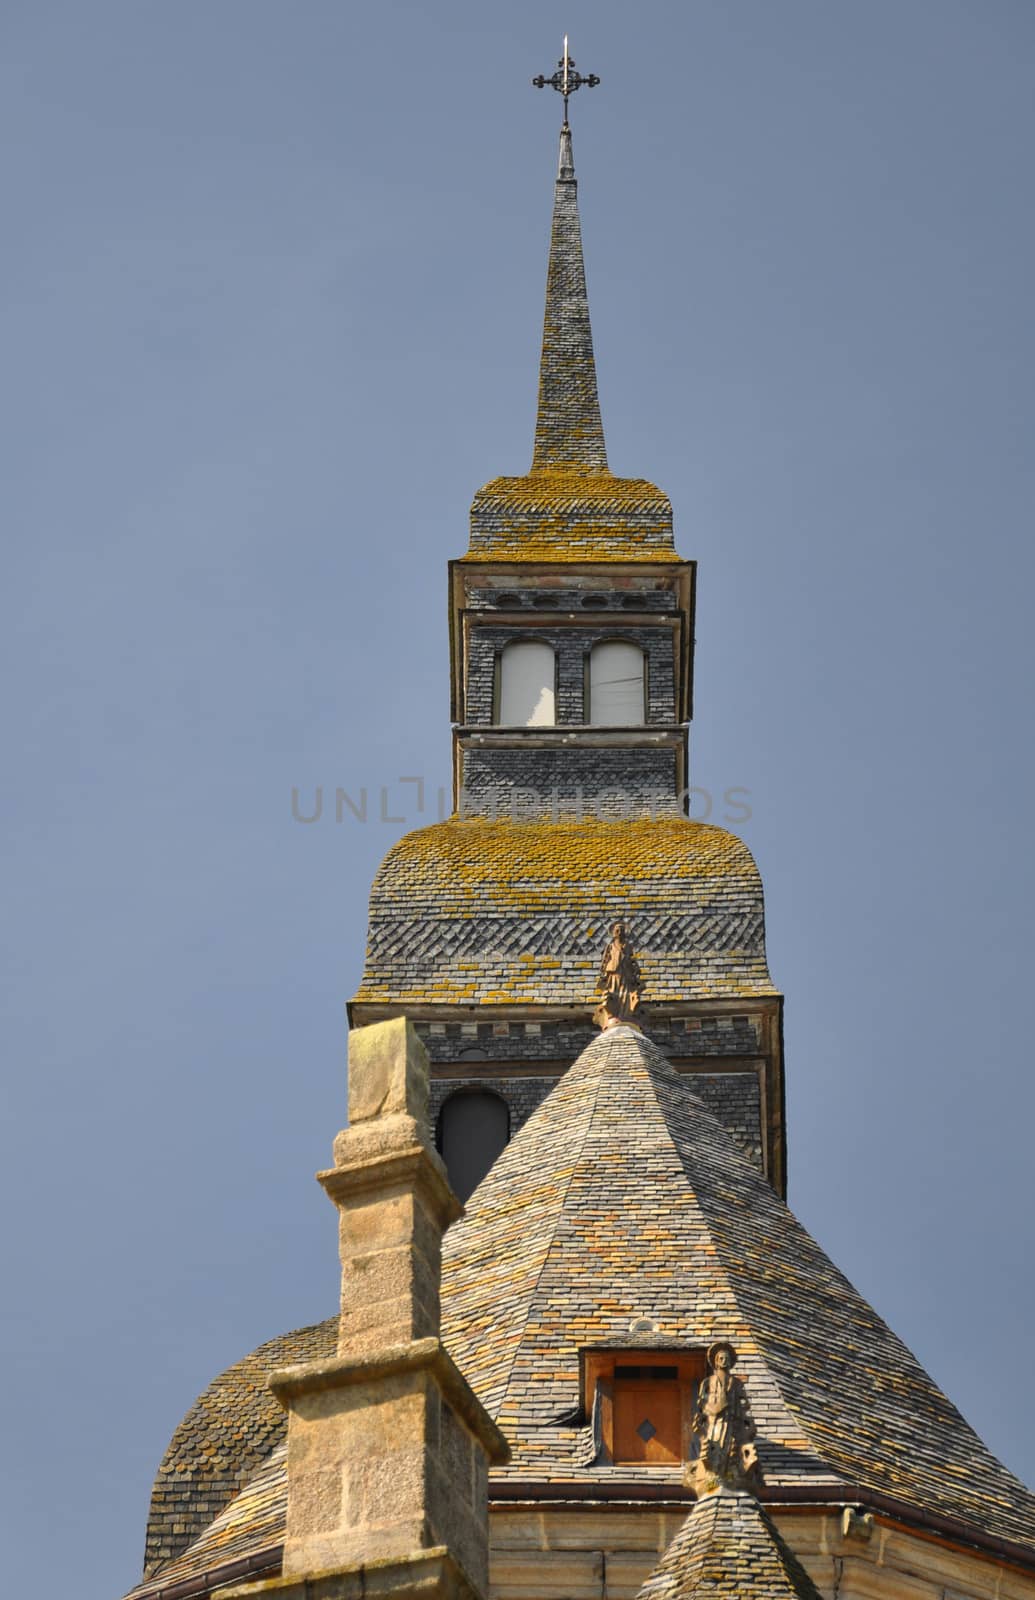 The graduated roof of the Basilique St Sauveur, Dinan in Brittany, France. The church is a mixture of Romanesque & Byzantine styles, and is unique in Britanny